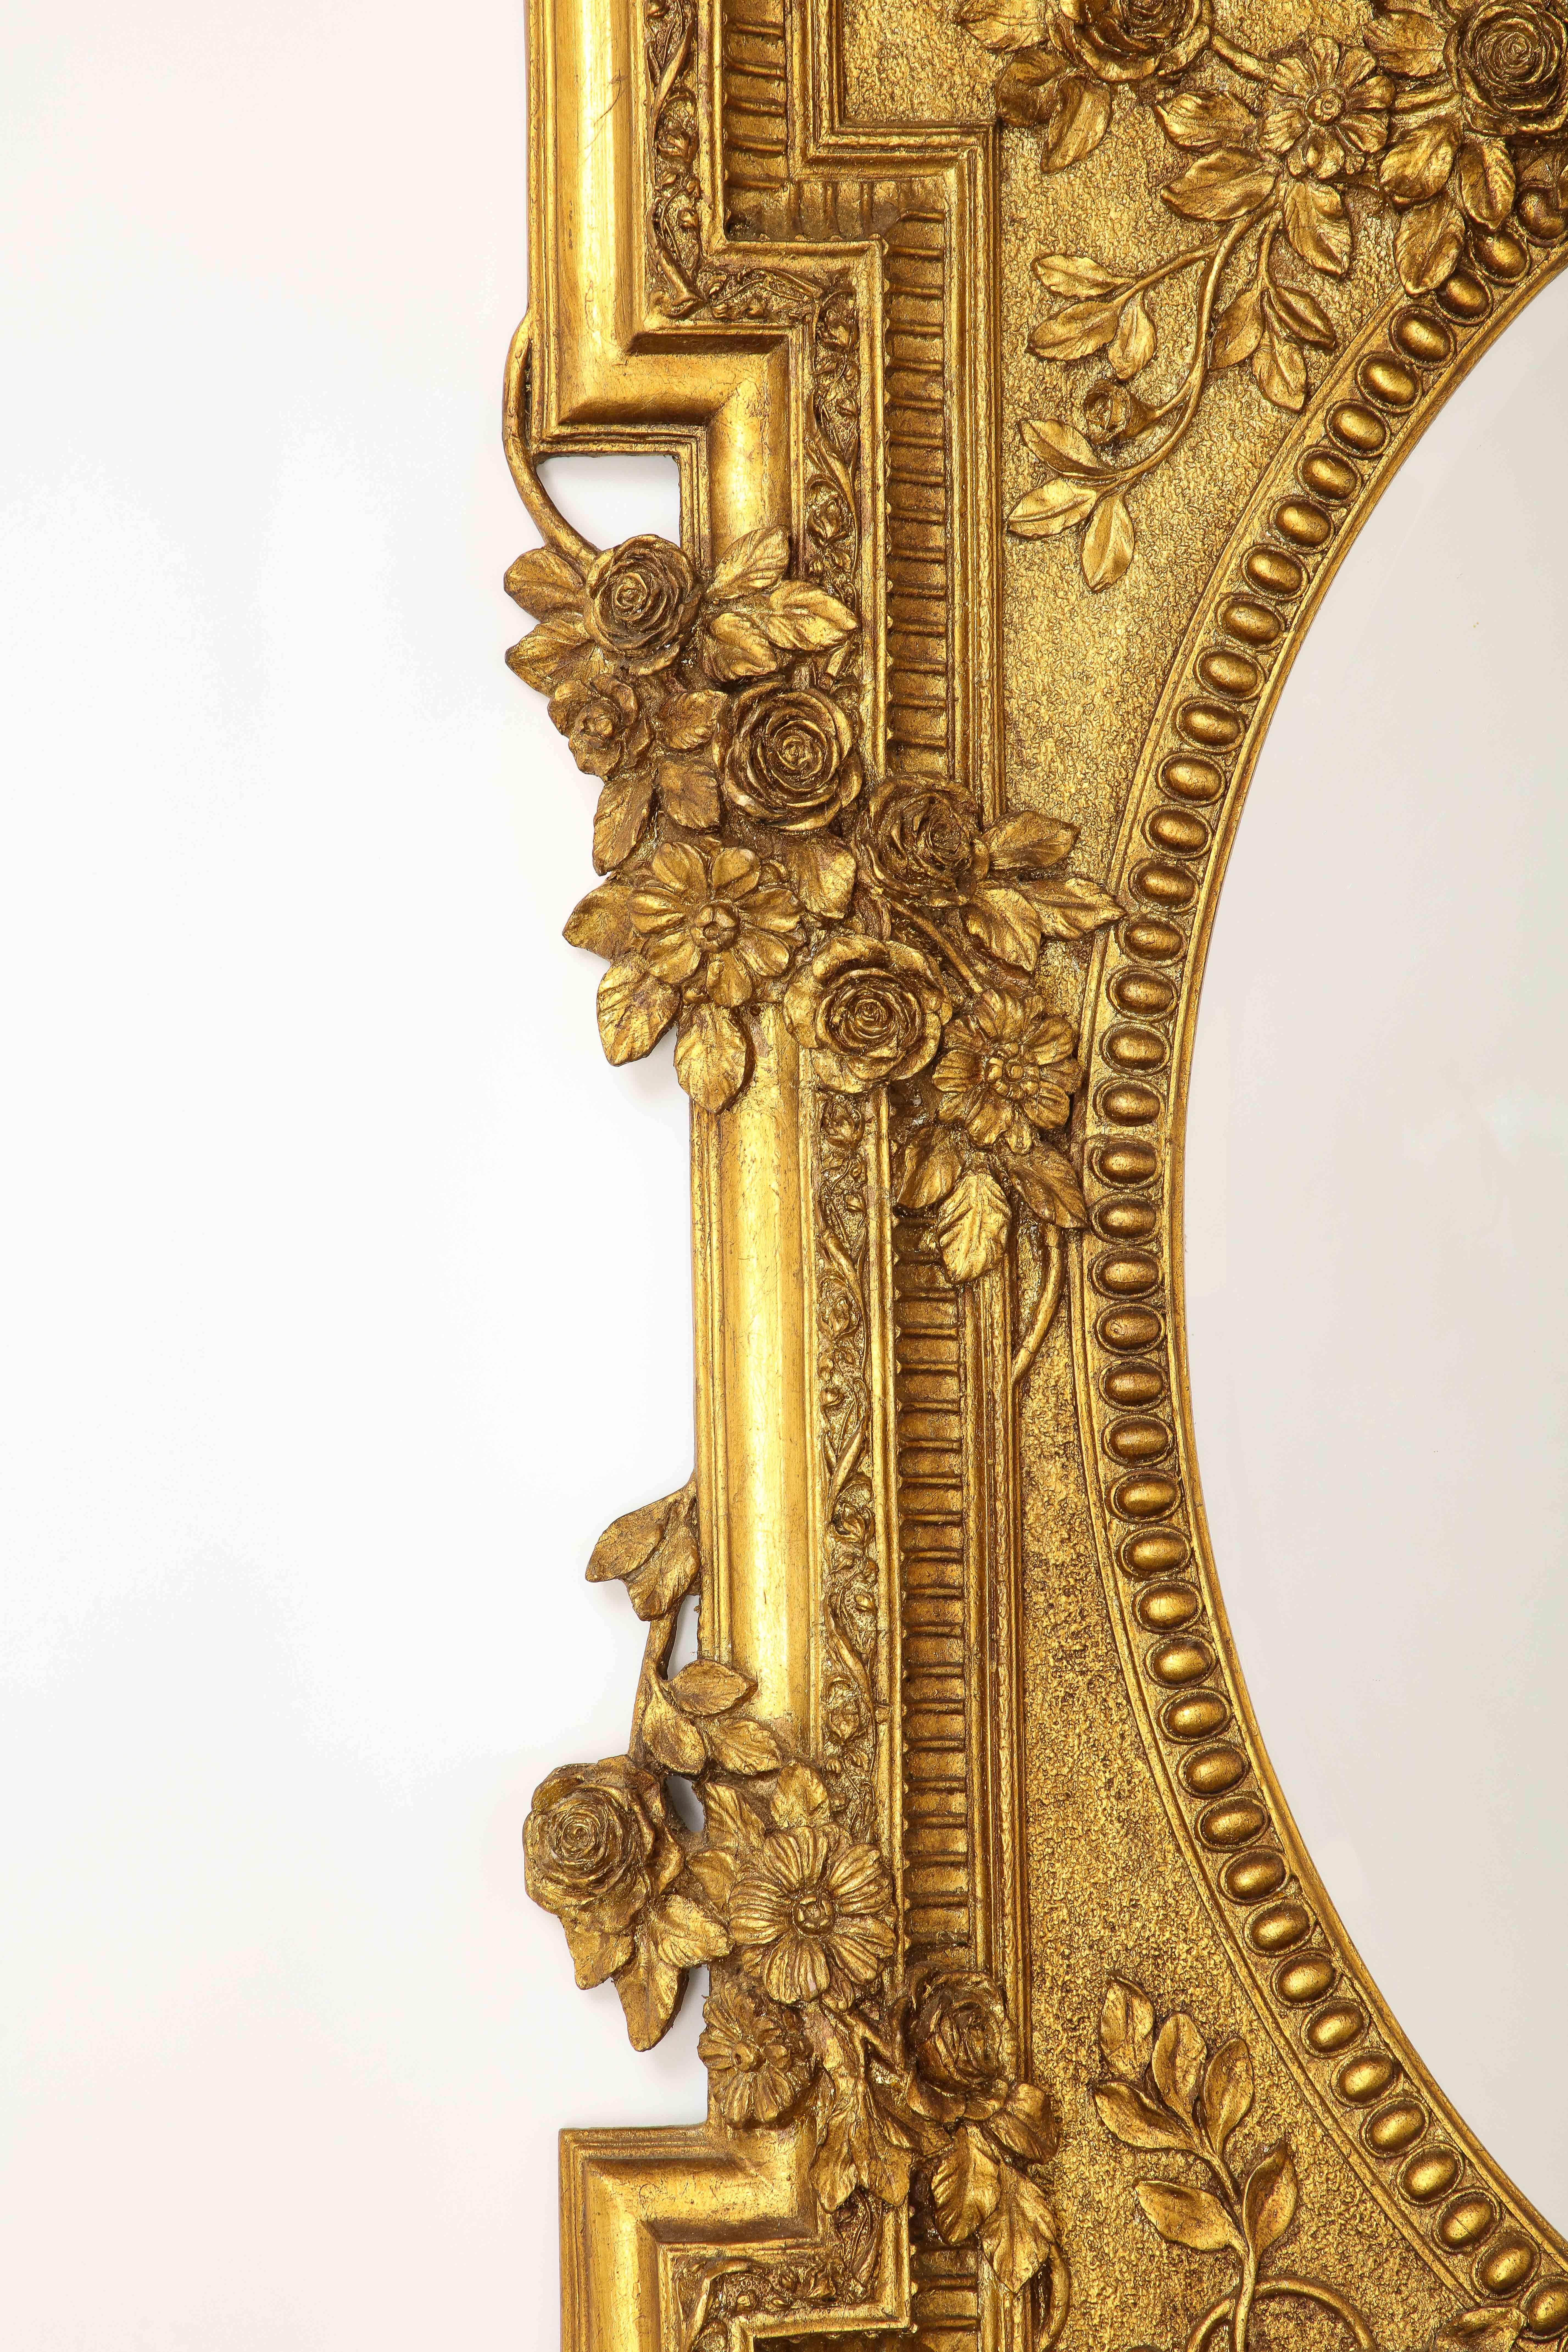 Marvelous French Giltwood Hand-Carved Beveled Mirror with Floral Vine Designs For Sale 2